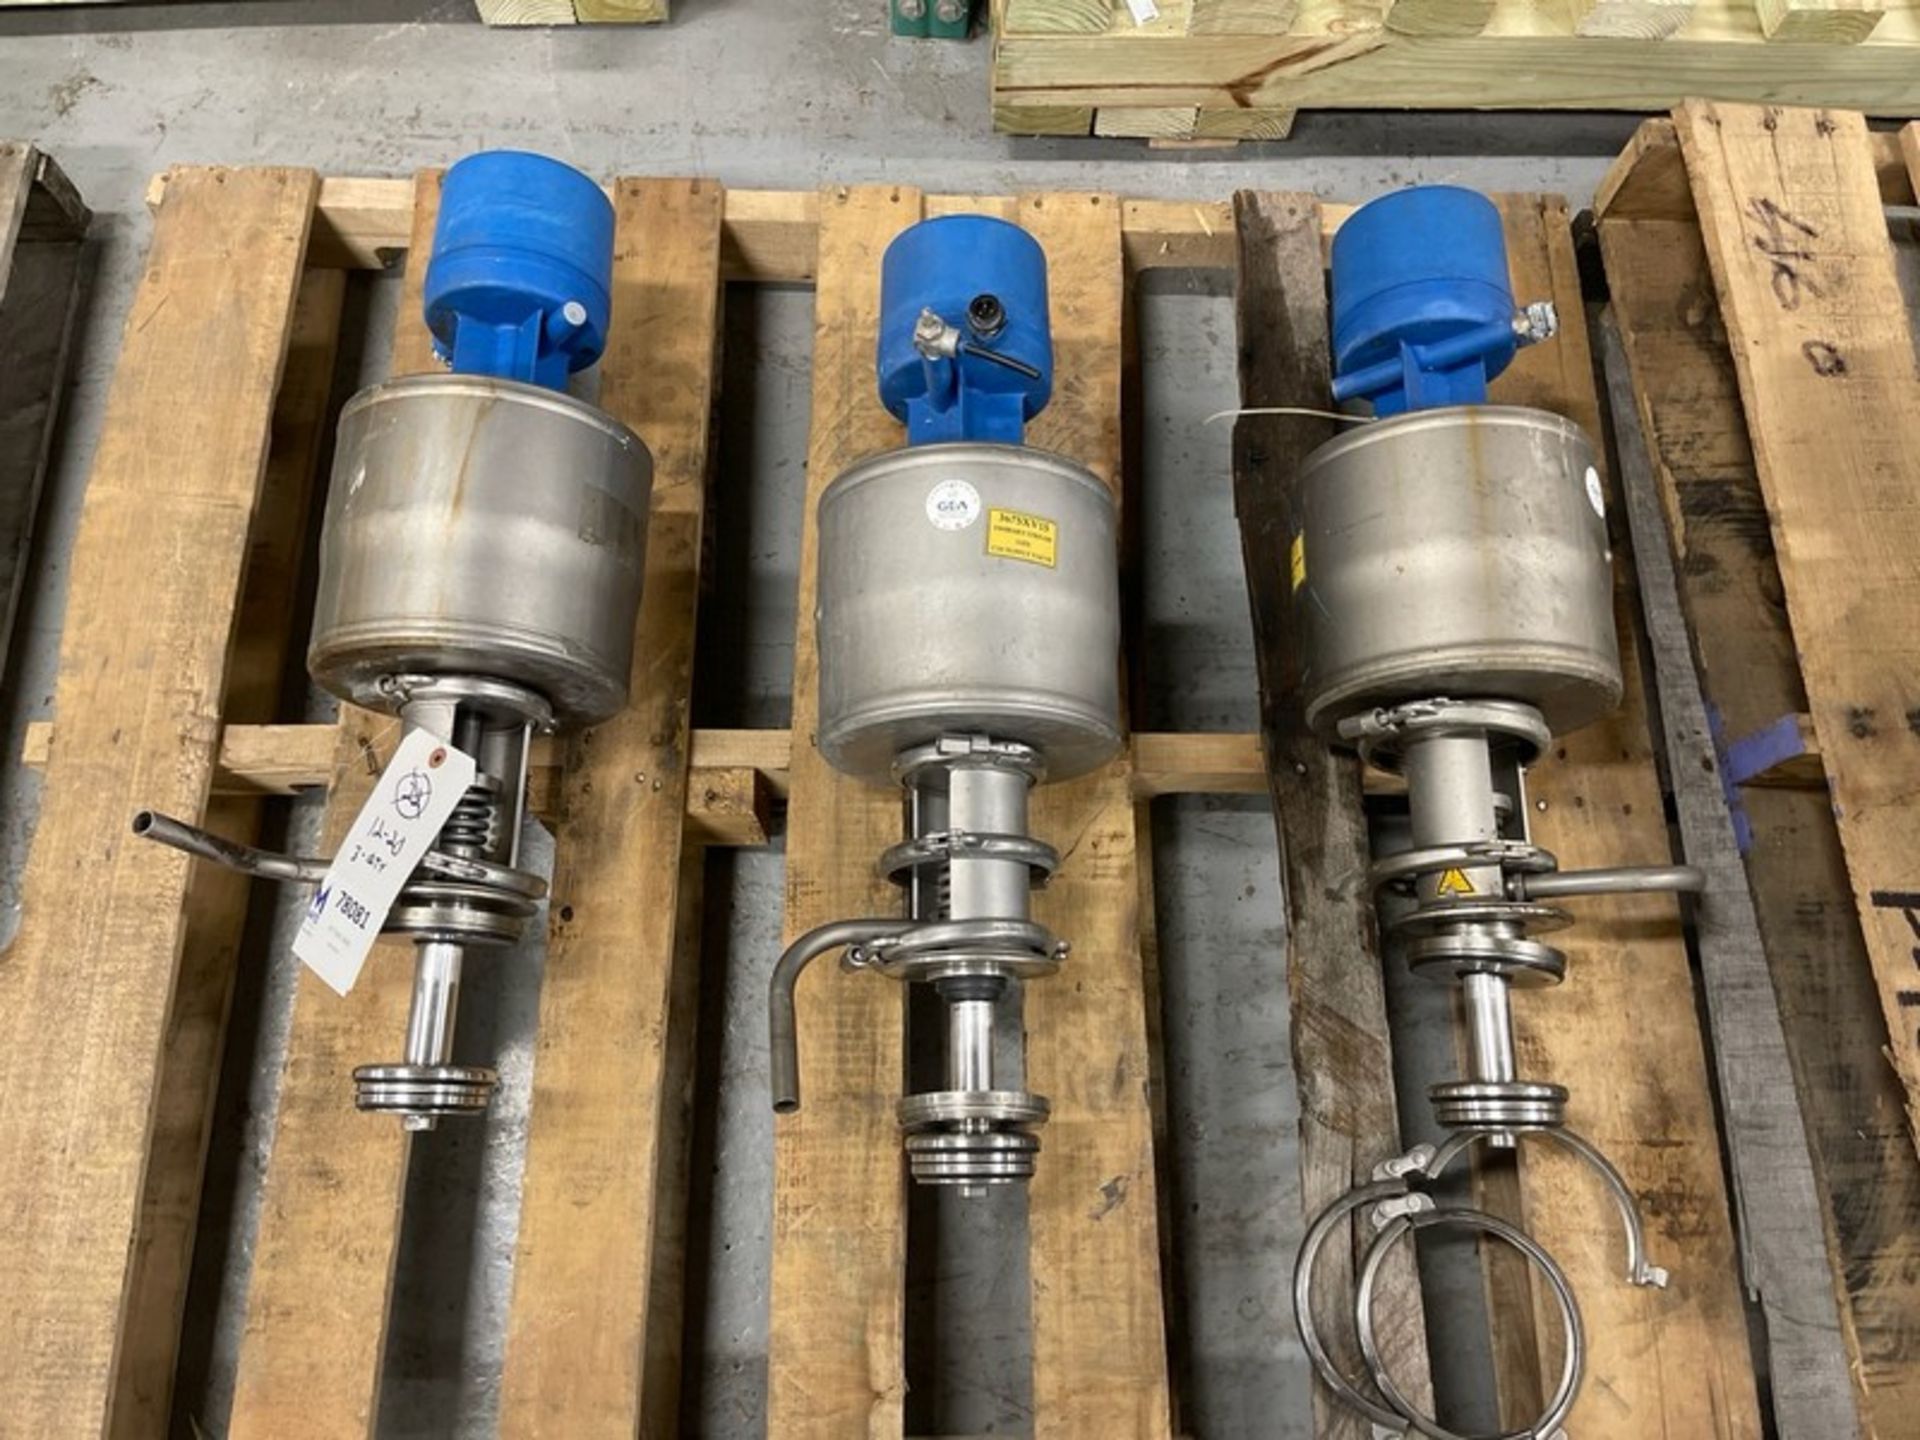 (4) GEA Assorted Aprox. 6" S/S Air Valves Actuators with Think Tops (NOTE: Bodies Not Included;